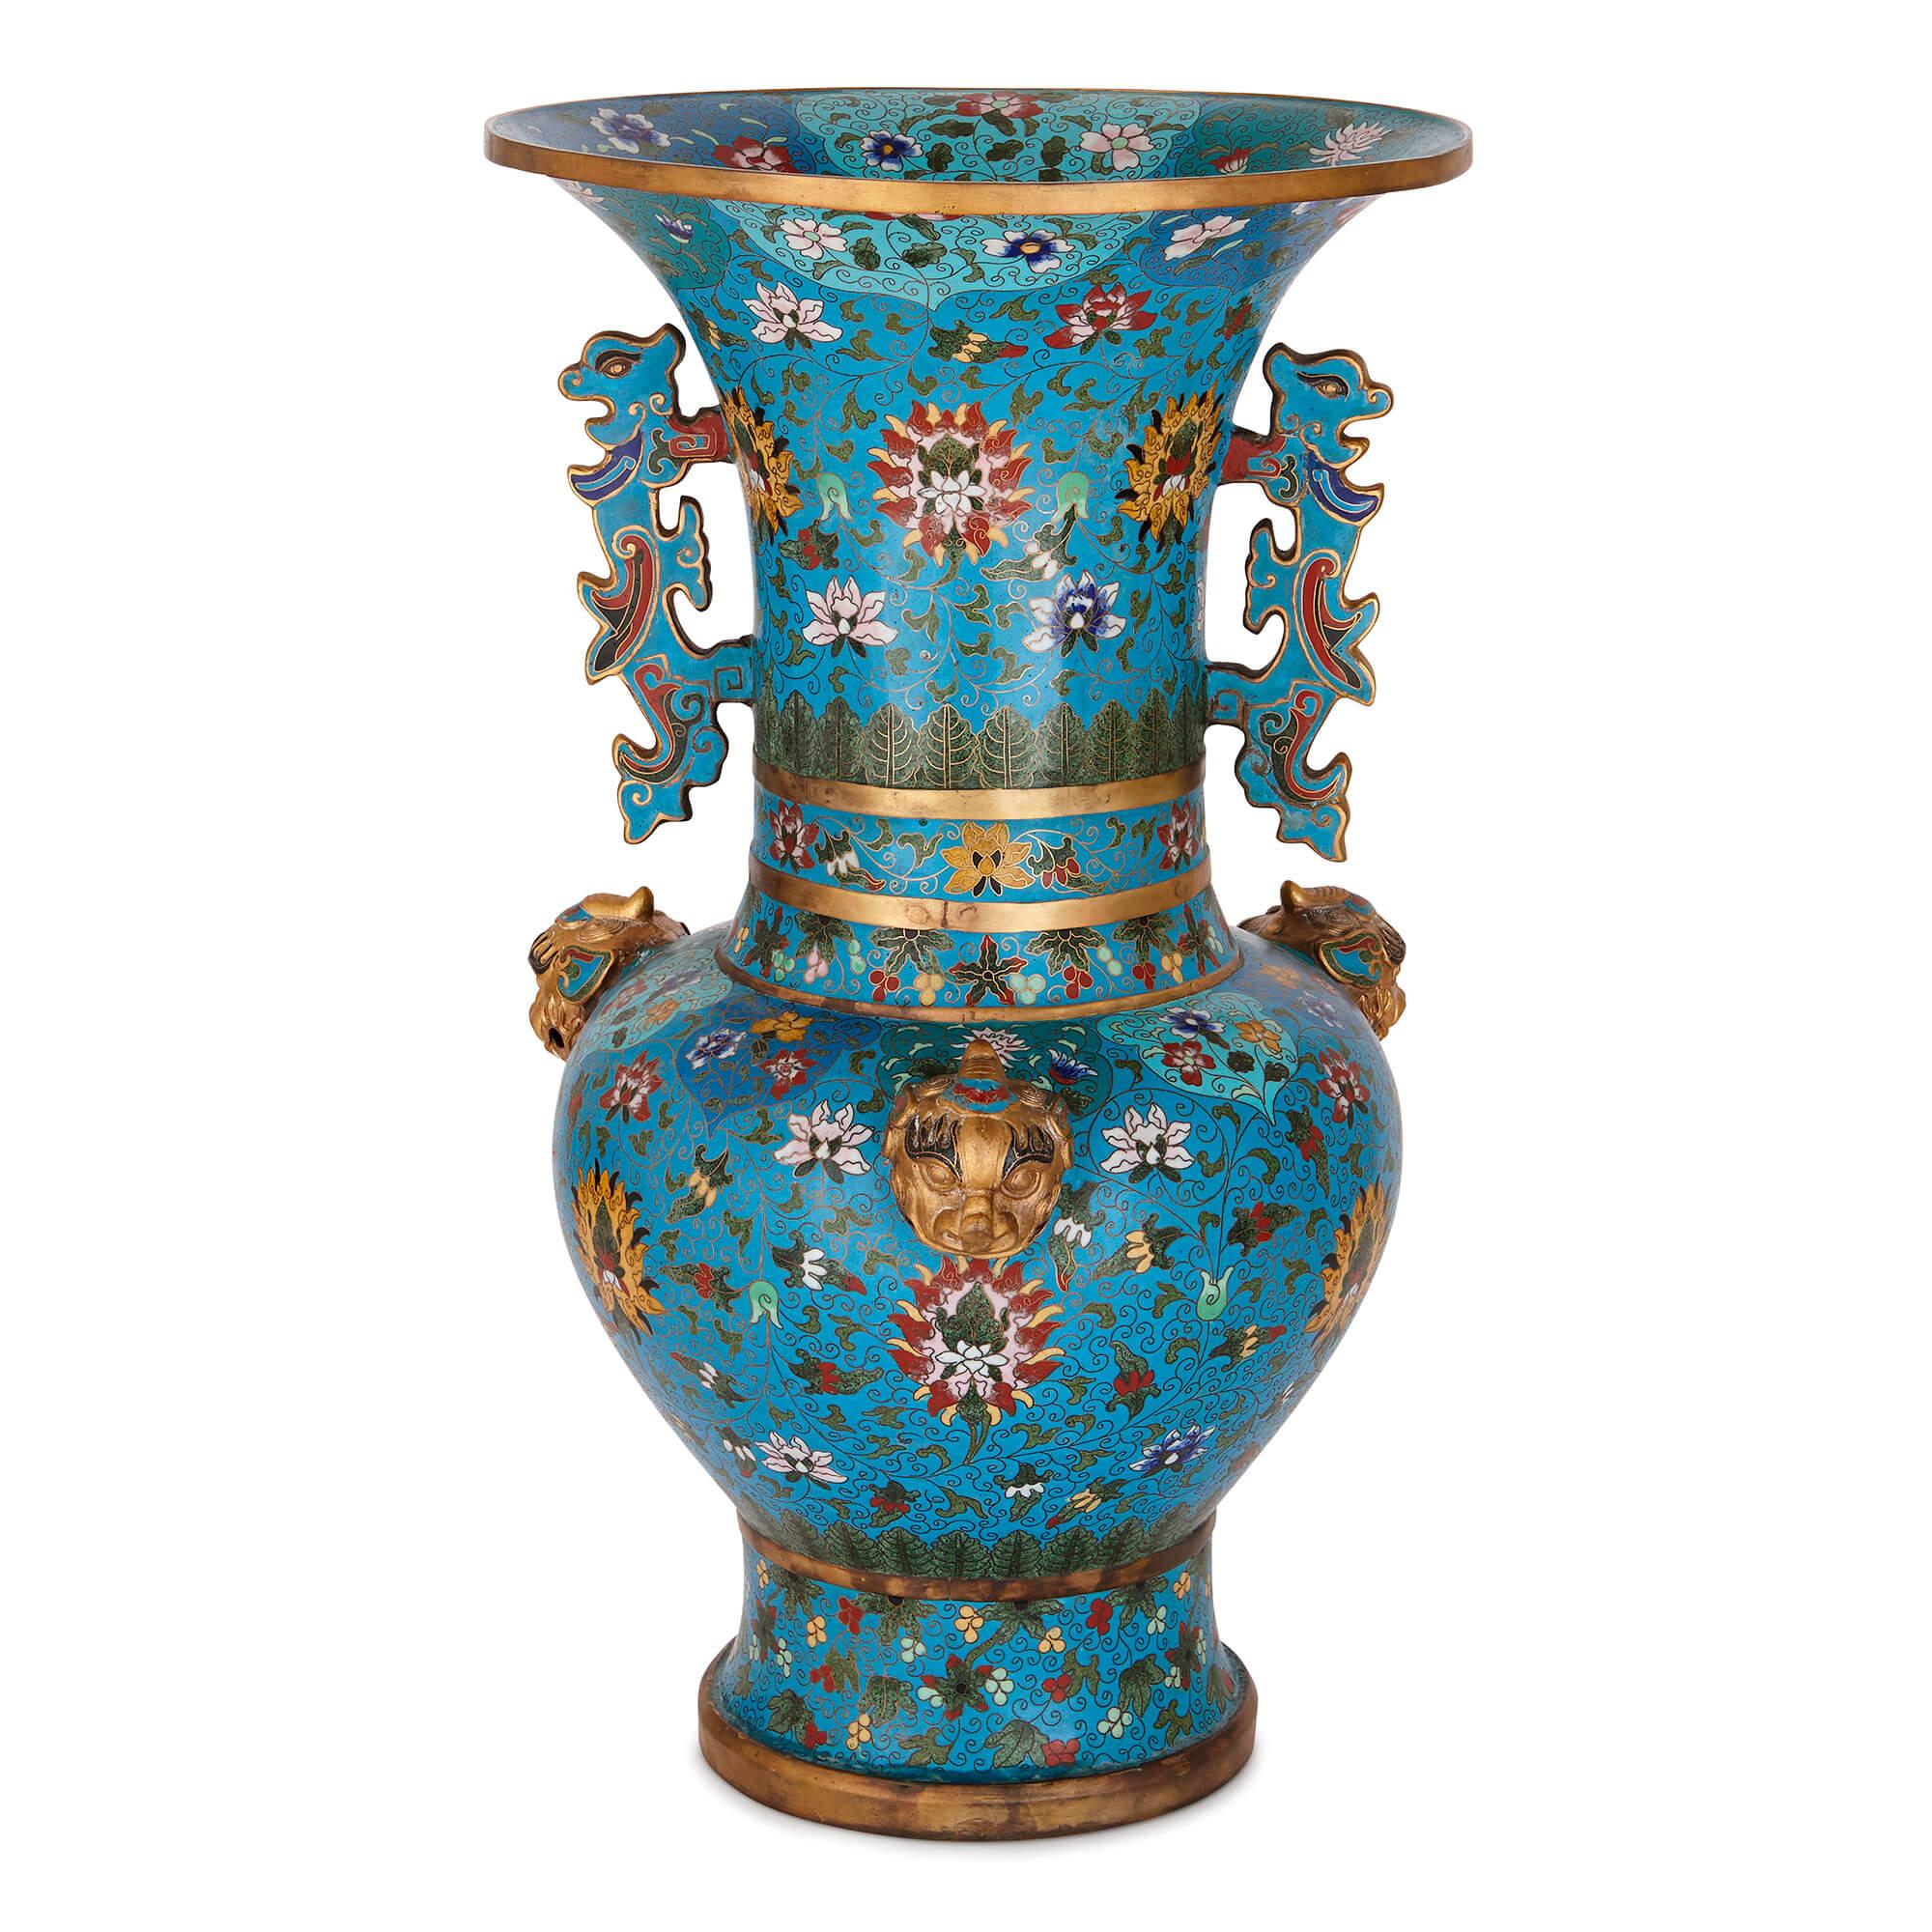 Crafted in the Qing dynasty, these vases are of elegant baluster form with broad, trumpet necks. The rims, necks and bases are decorated with gilt banding, which complements the gold lotus flowers seen on the bodies of the vases. 

These striking